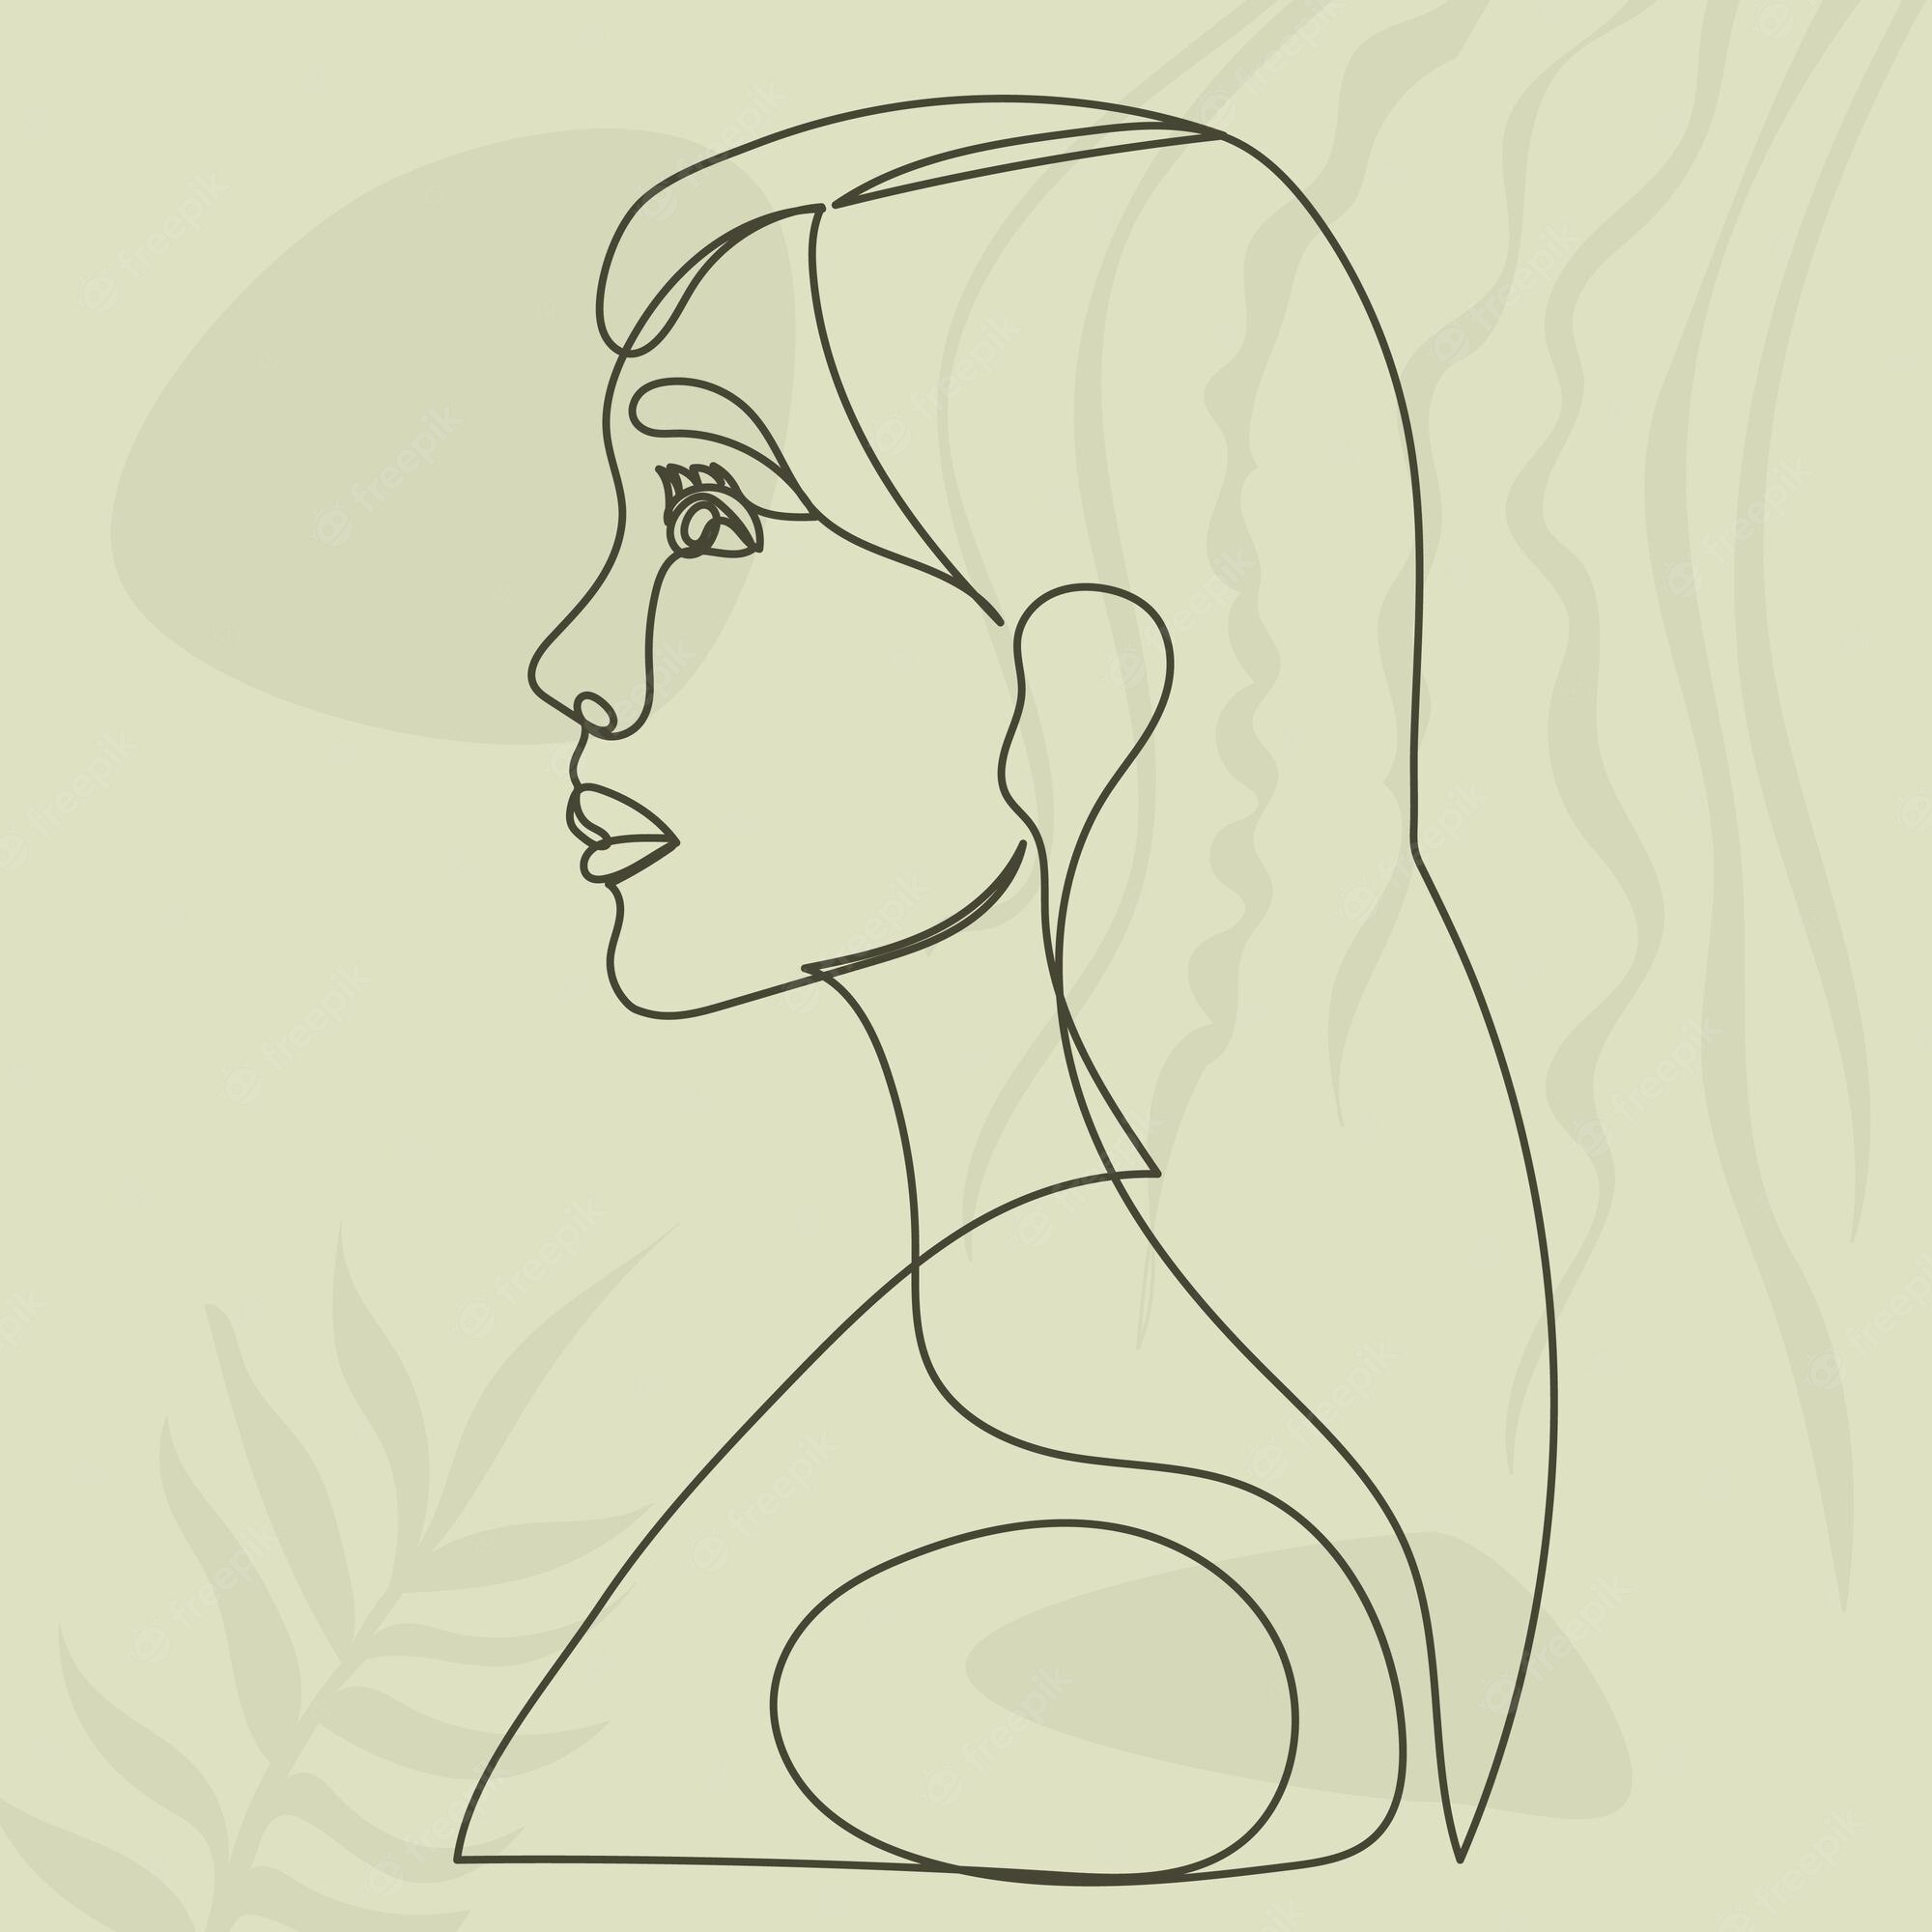 Premium Vector. Girl portrait drawing in one continuous line